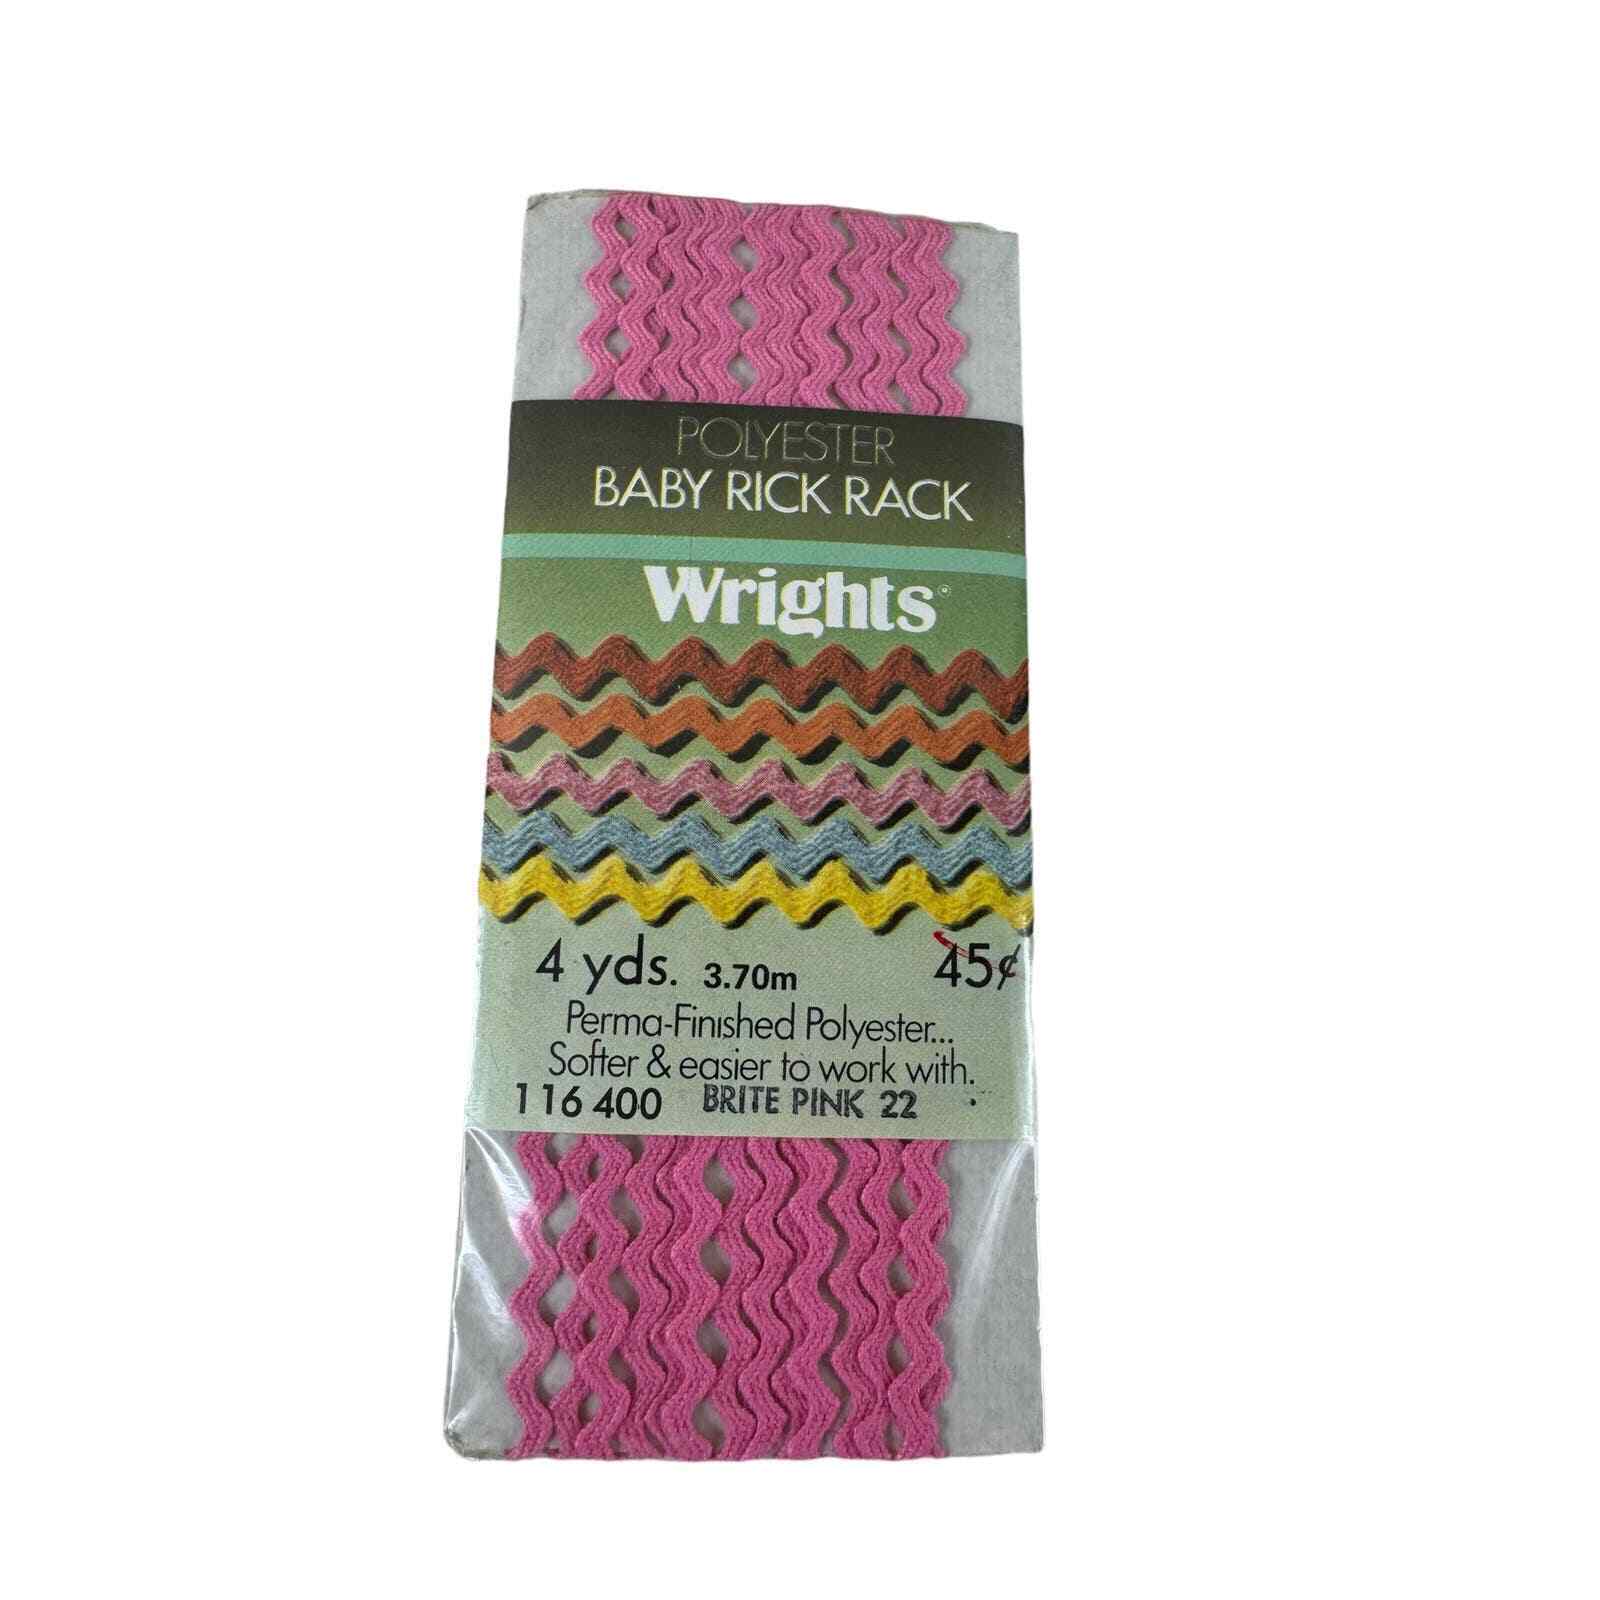 New In Package Vintage Wrights Brite Pink 22 Polyester Baby Rick Rack 4 Yard USA